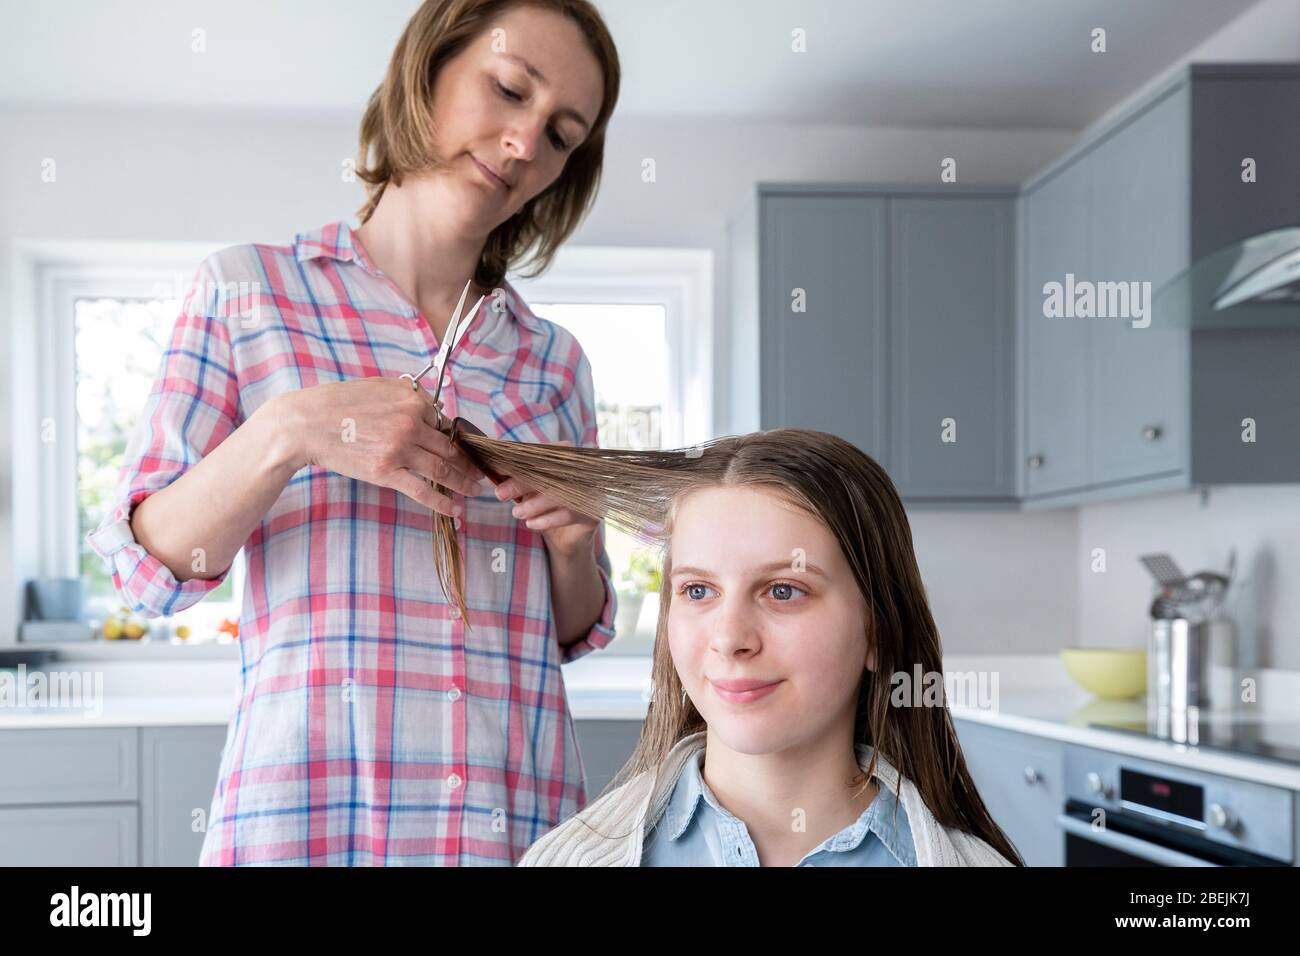 Mother Cutting Teenage Daughters Hair At Home During Lockdown Stock Photo